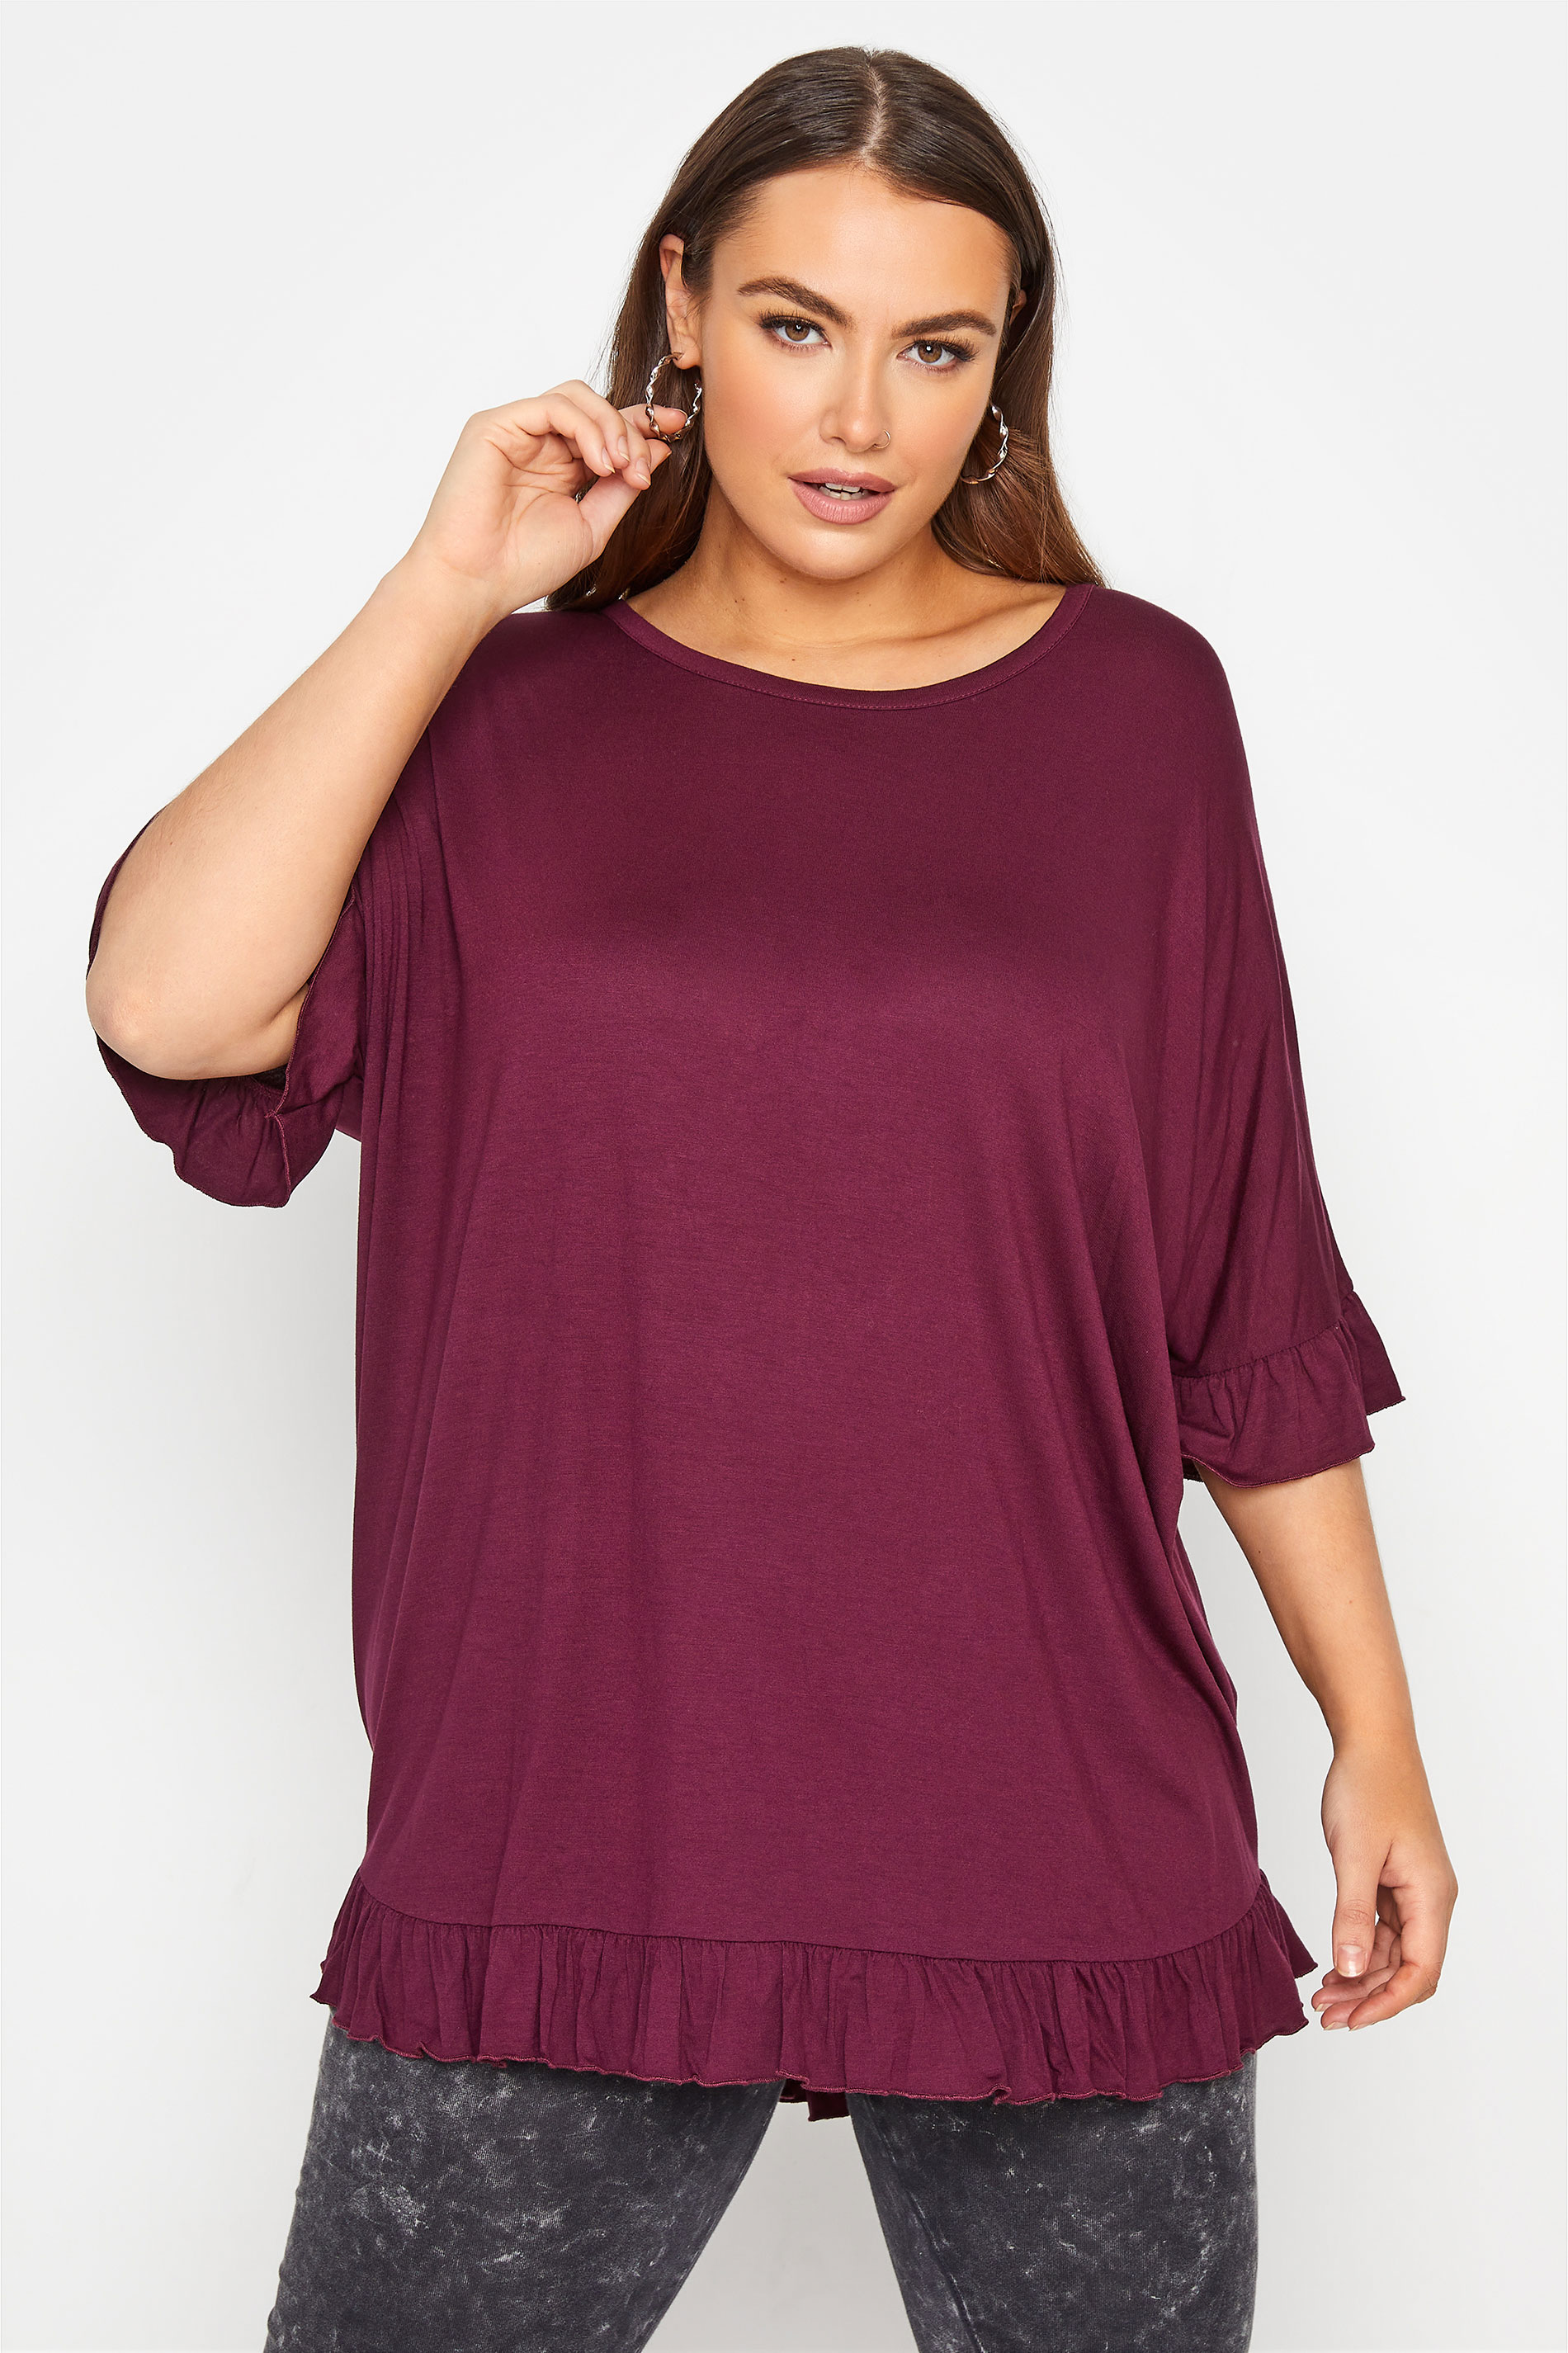 LIMITED COLLECTION Curve Berry Purple Frill Jersey T-Shirt_A.jpg